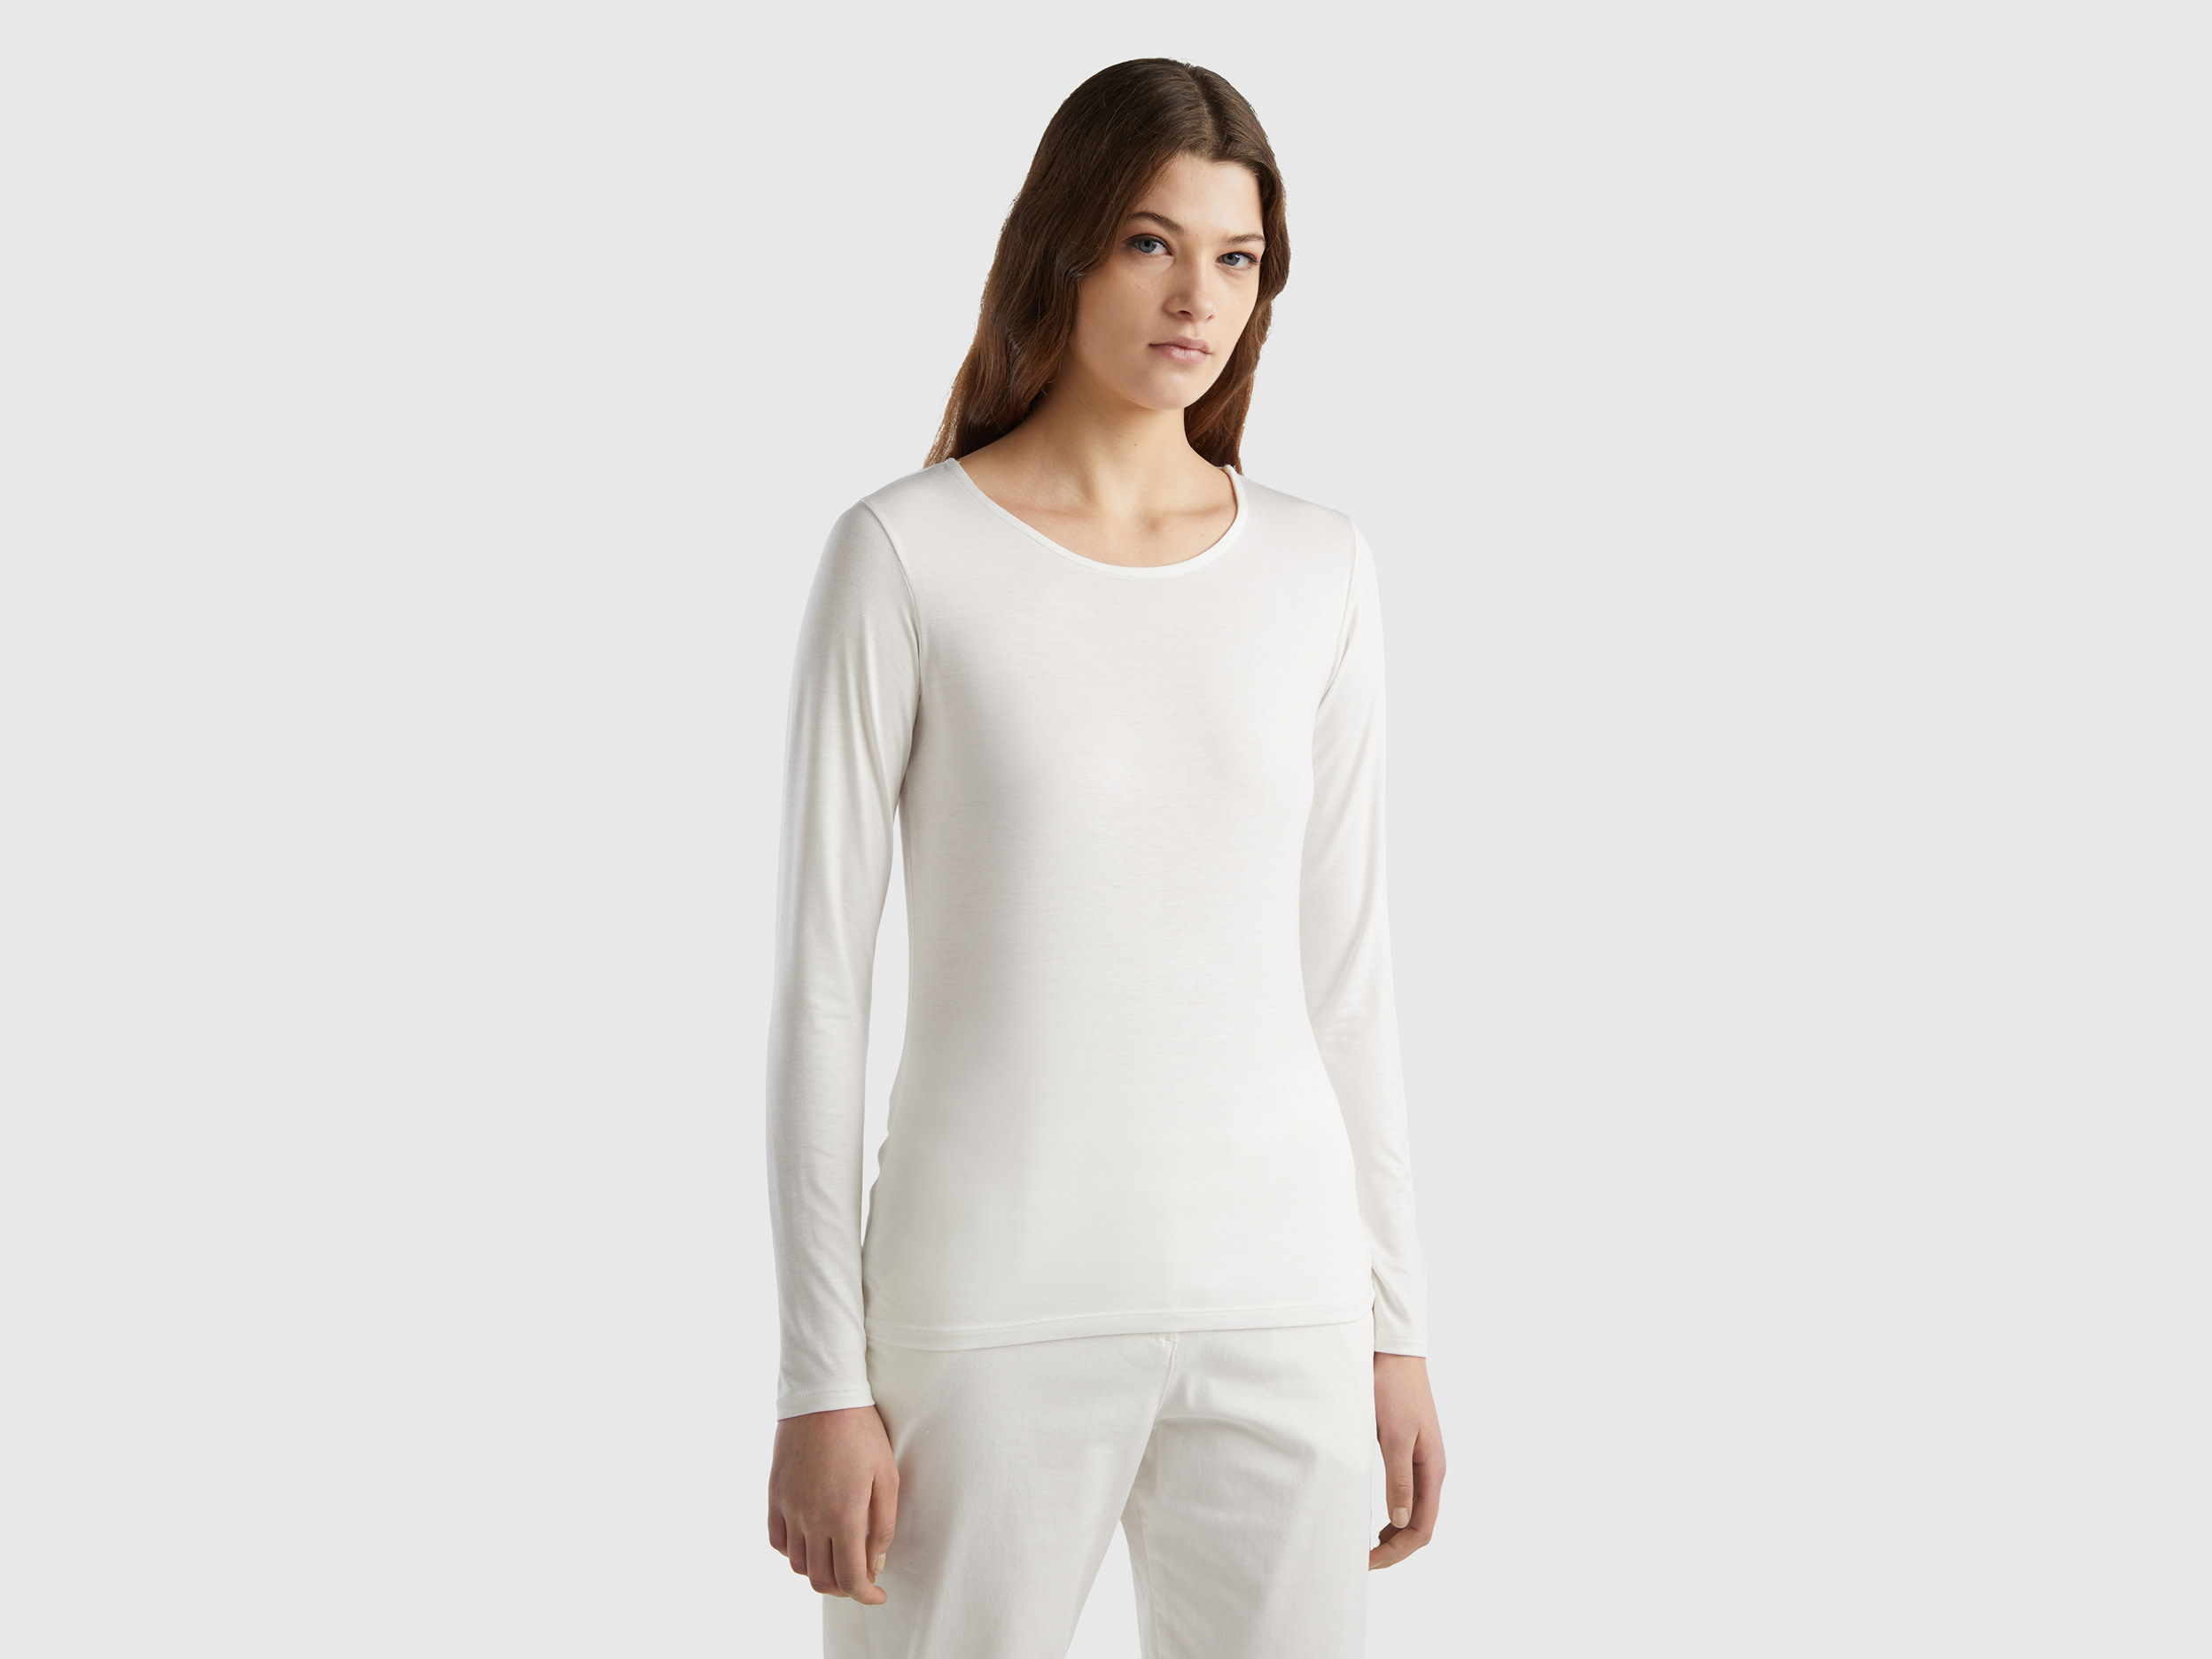 Benetton, T-shirt In Sustainable Stretch Viscose, size L, Creamy White, Women